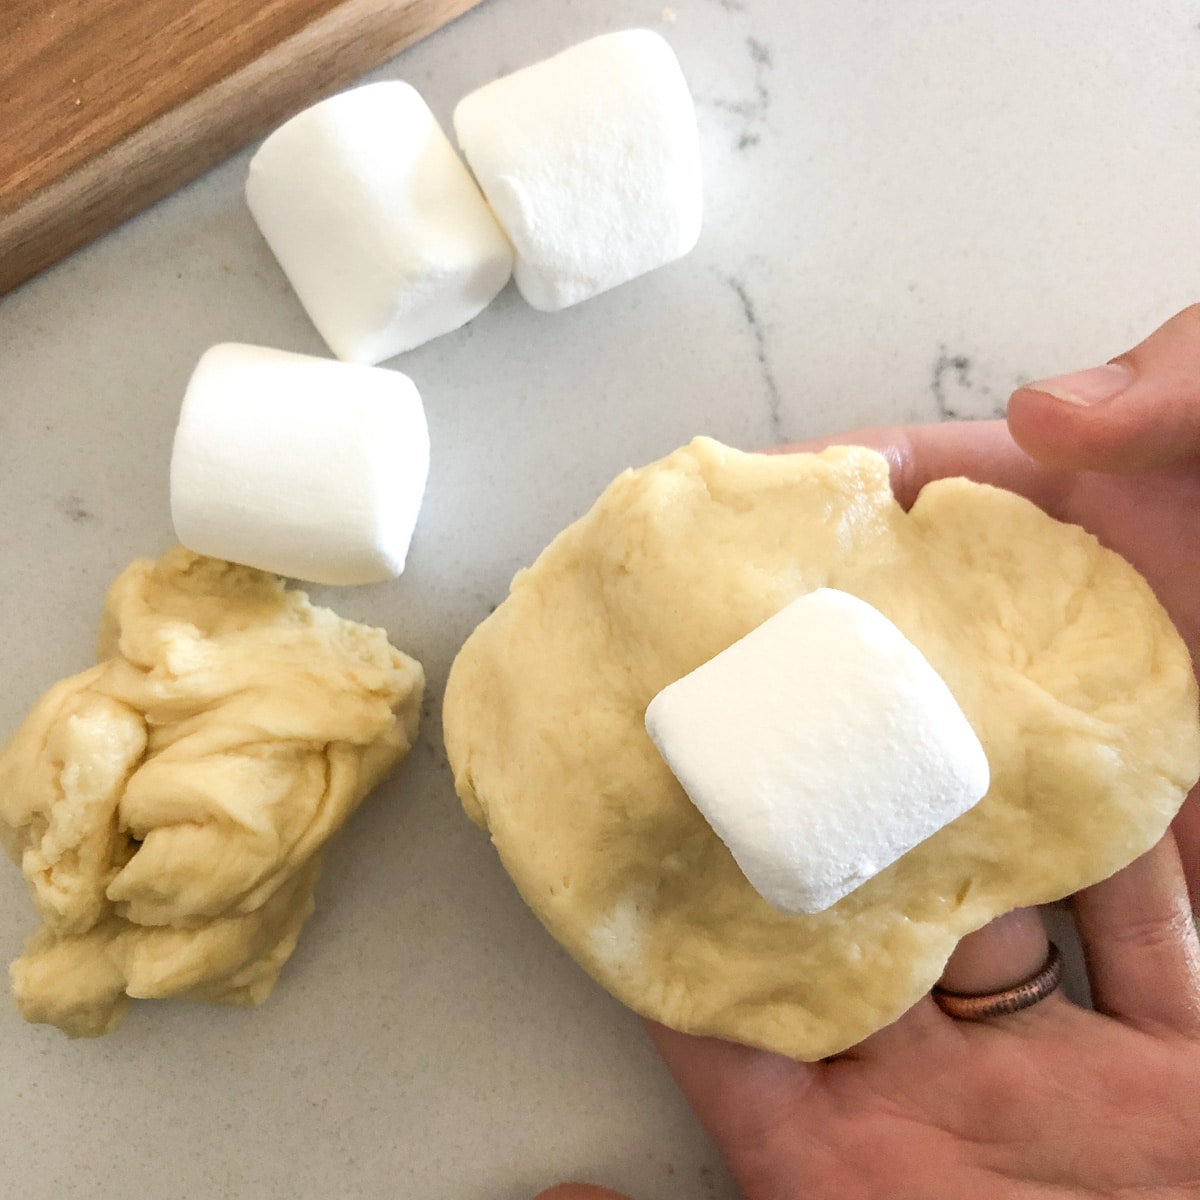 a hand holding bread dough with a marshmallow sitting on top